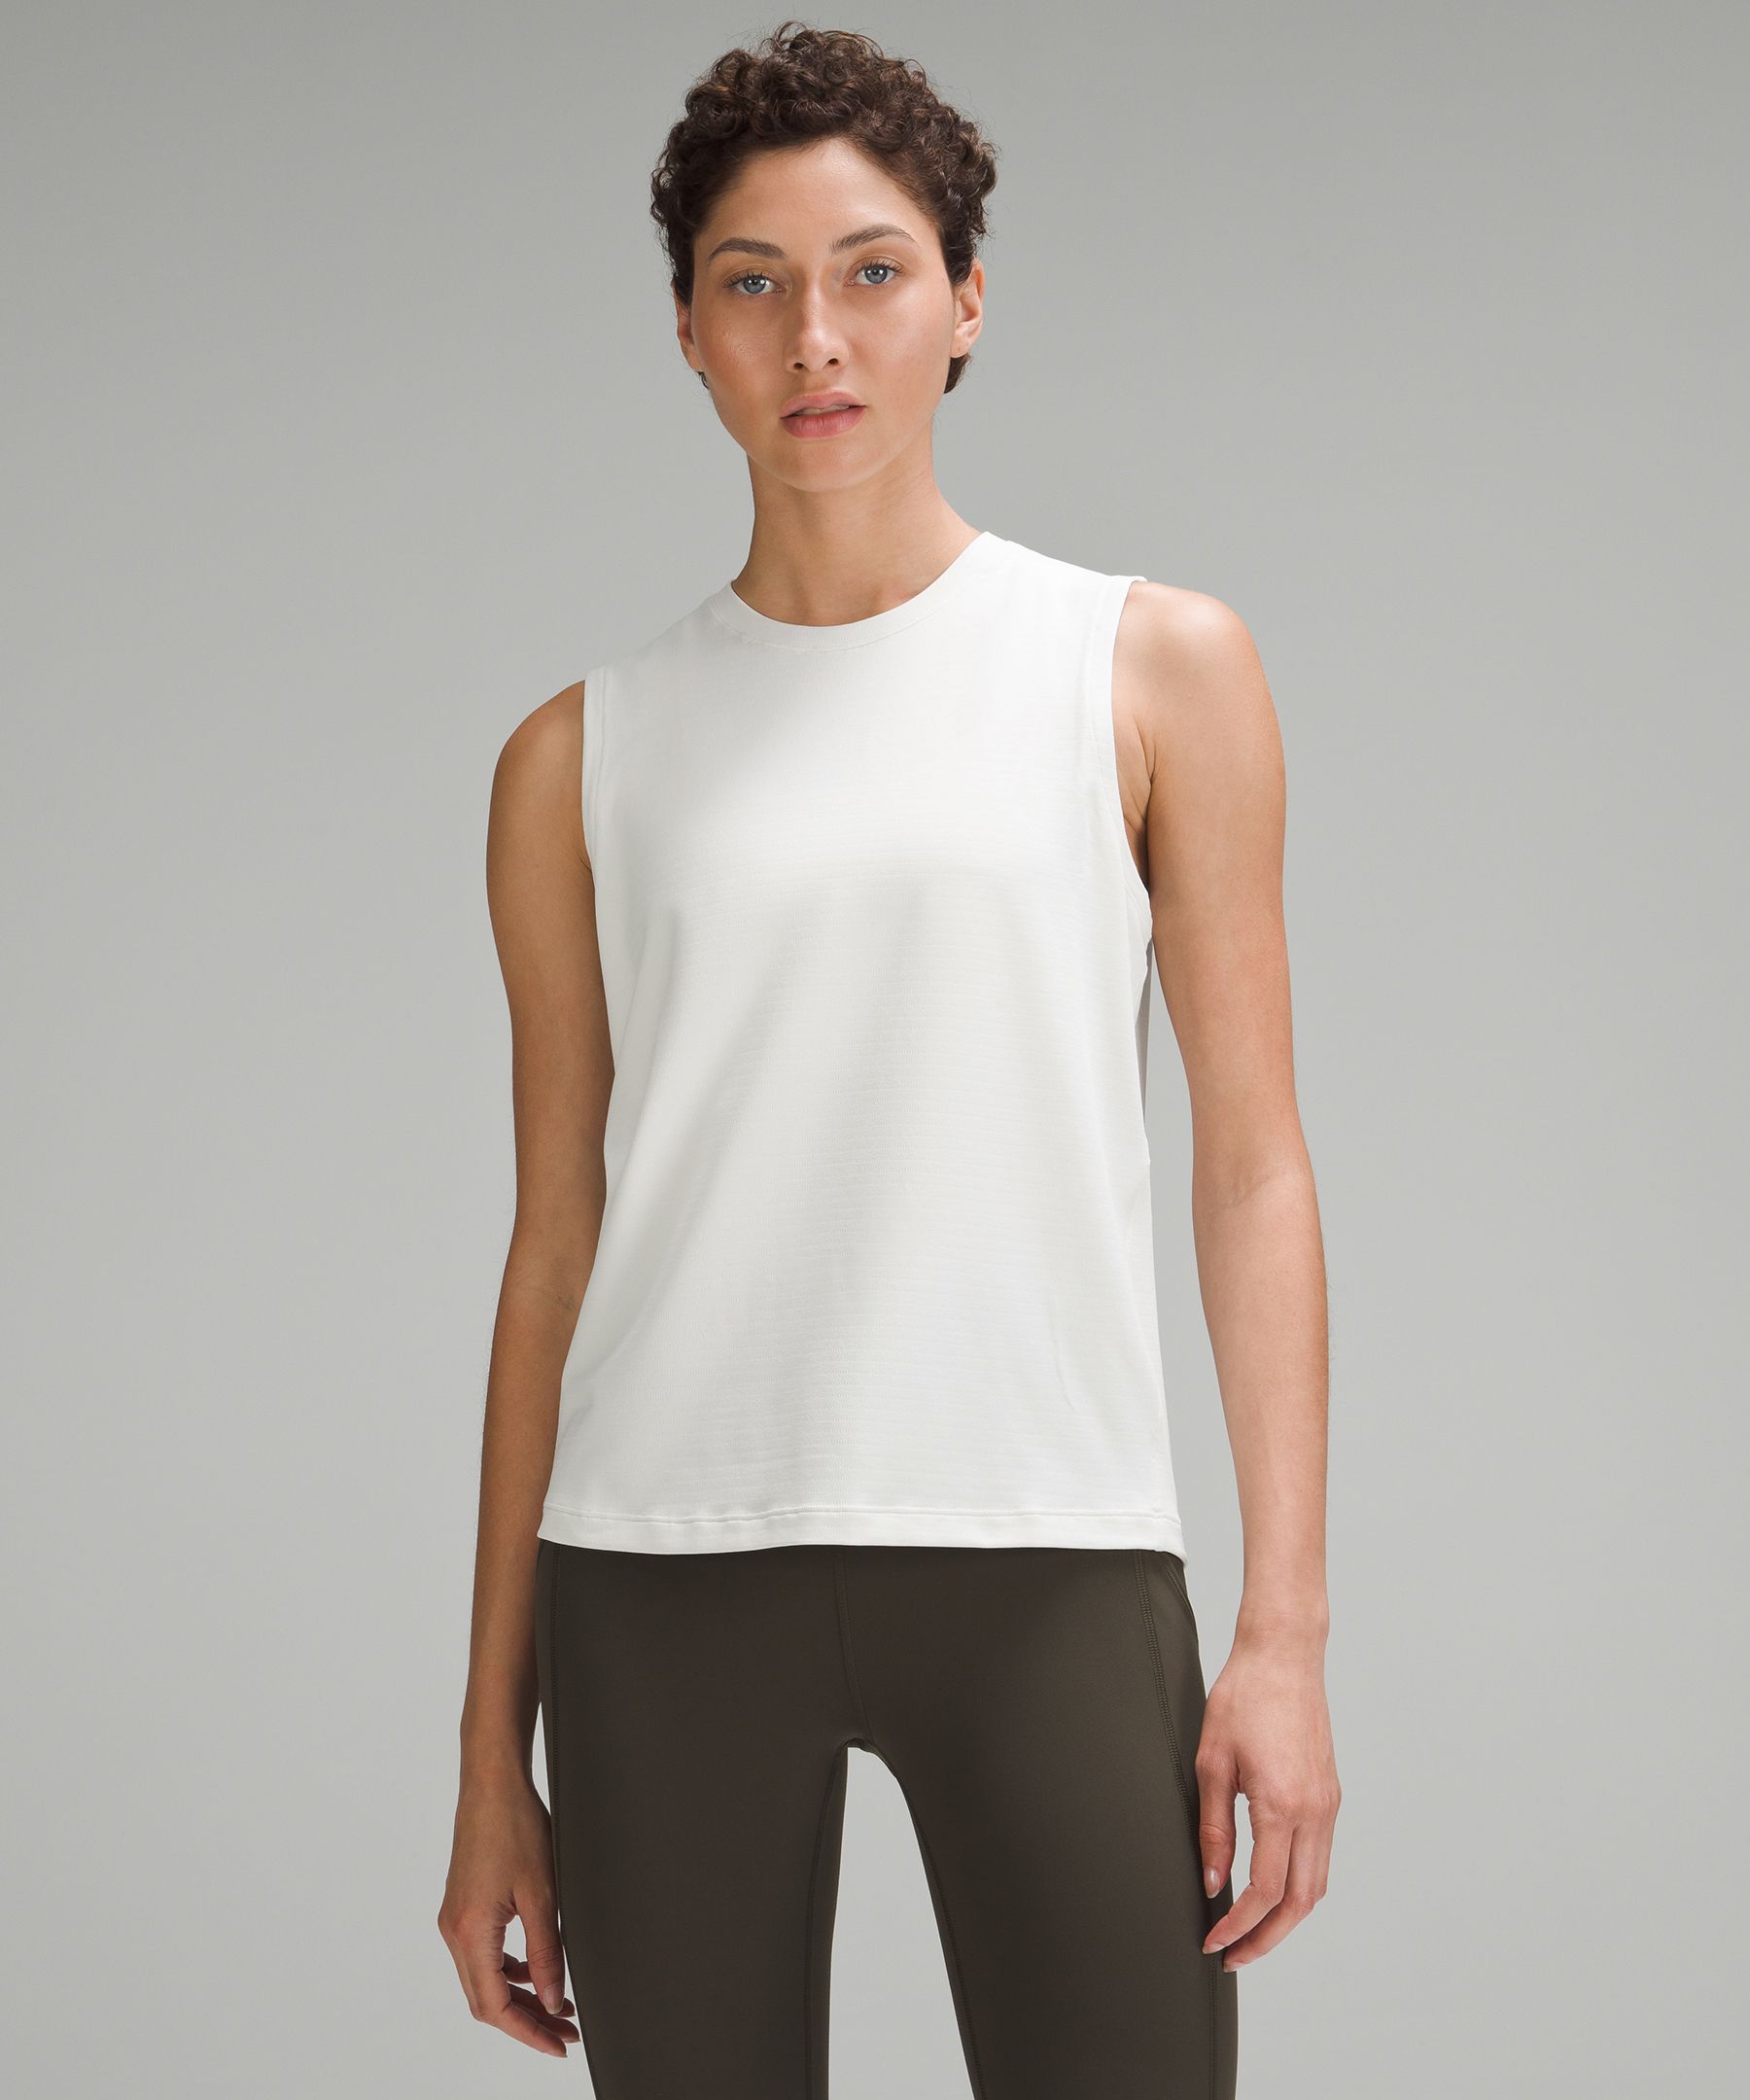 Lululemon Workout Top With Built In Brakes